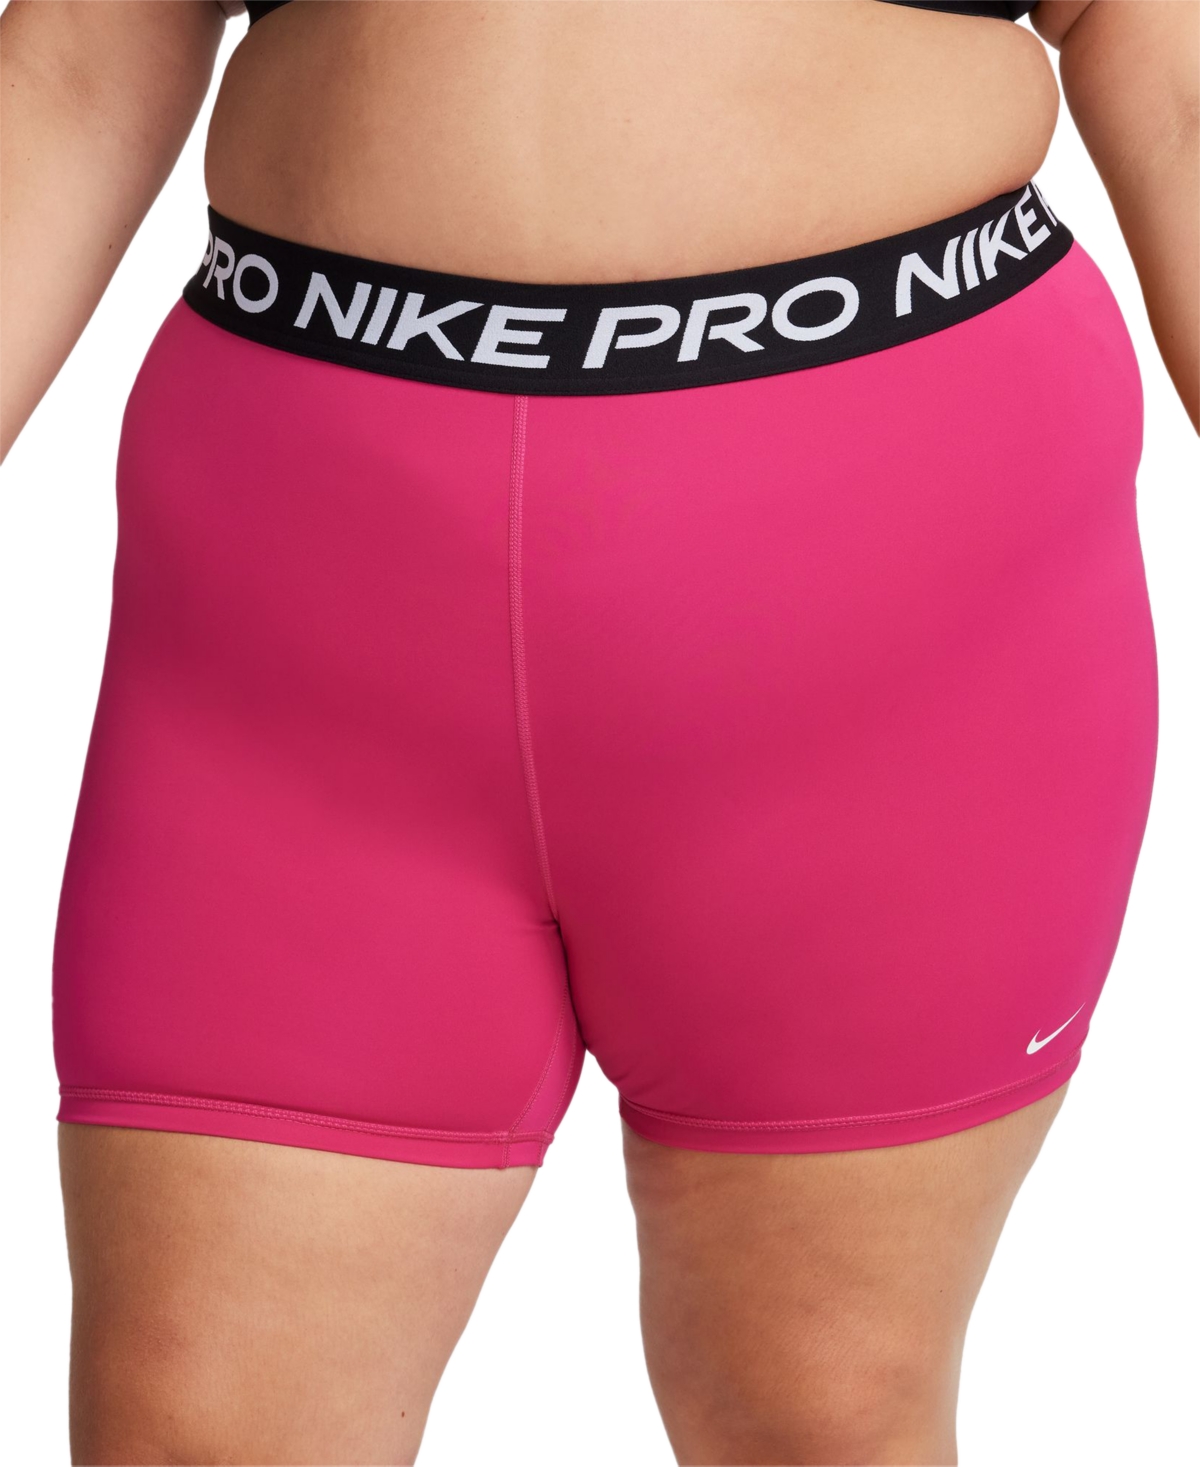 Nike Plus Size Active Pro-365 Dri-fit Elastic Logo Shorts In Pink